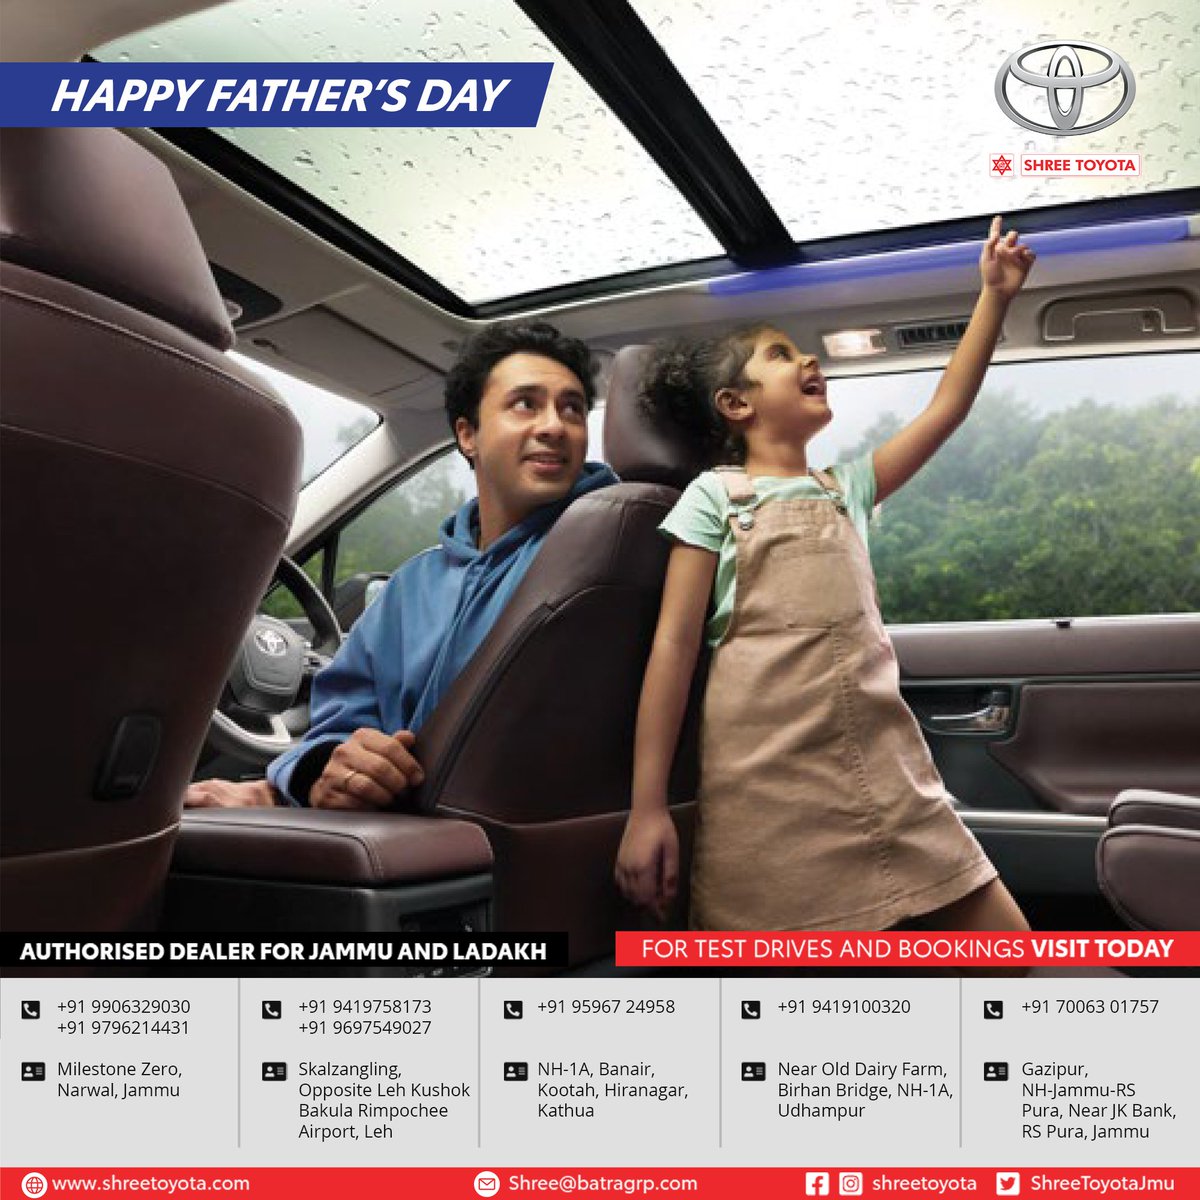 At every turn of life, reaching #NewHY of Love and Gratitude for our fathers. Thank you for everything you do for us.

#HappyFathersDay
#ToyotaInnovaHyCross
#ShreeToyota
#ToyotaIndia
#Jammu
#Ladakh